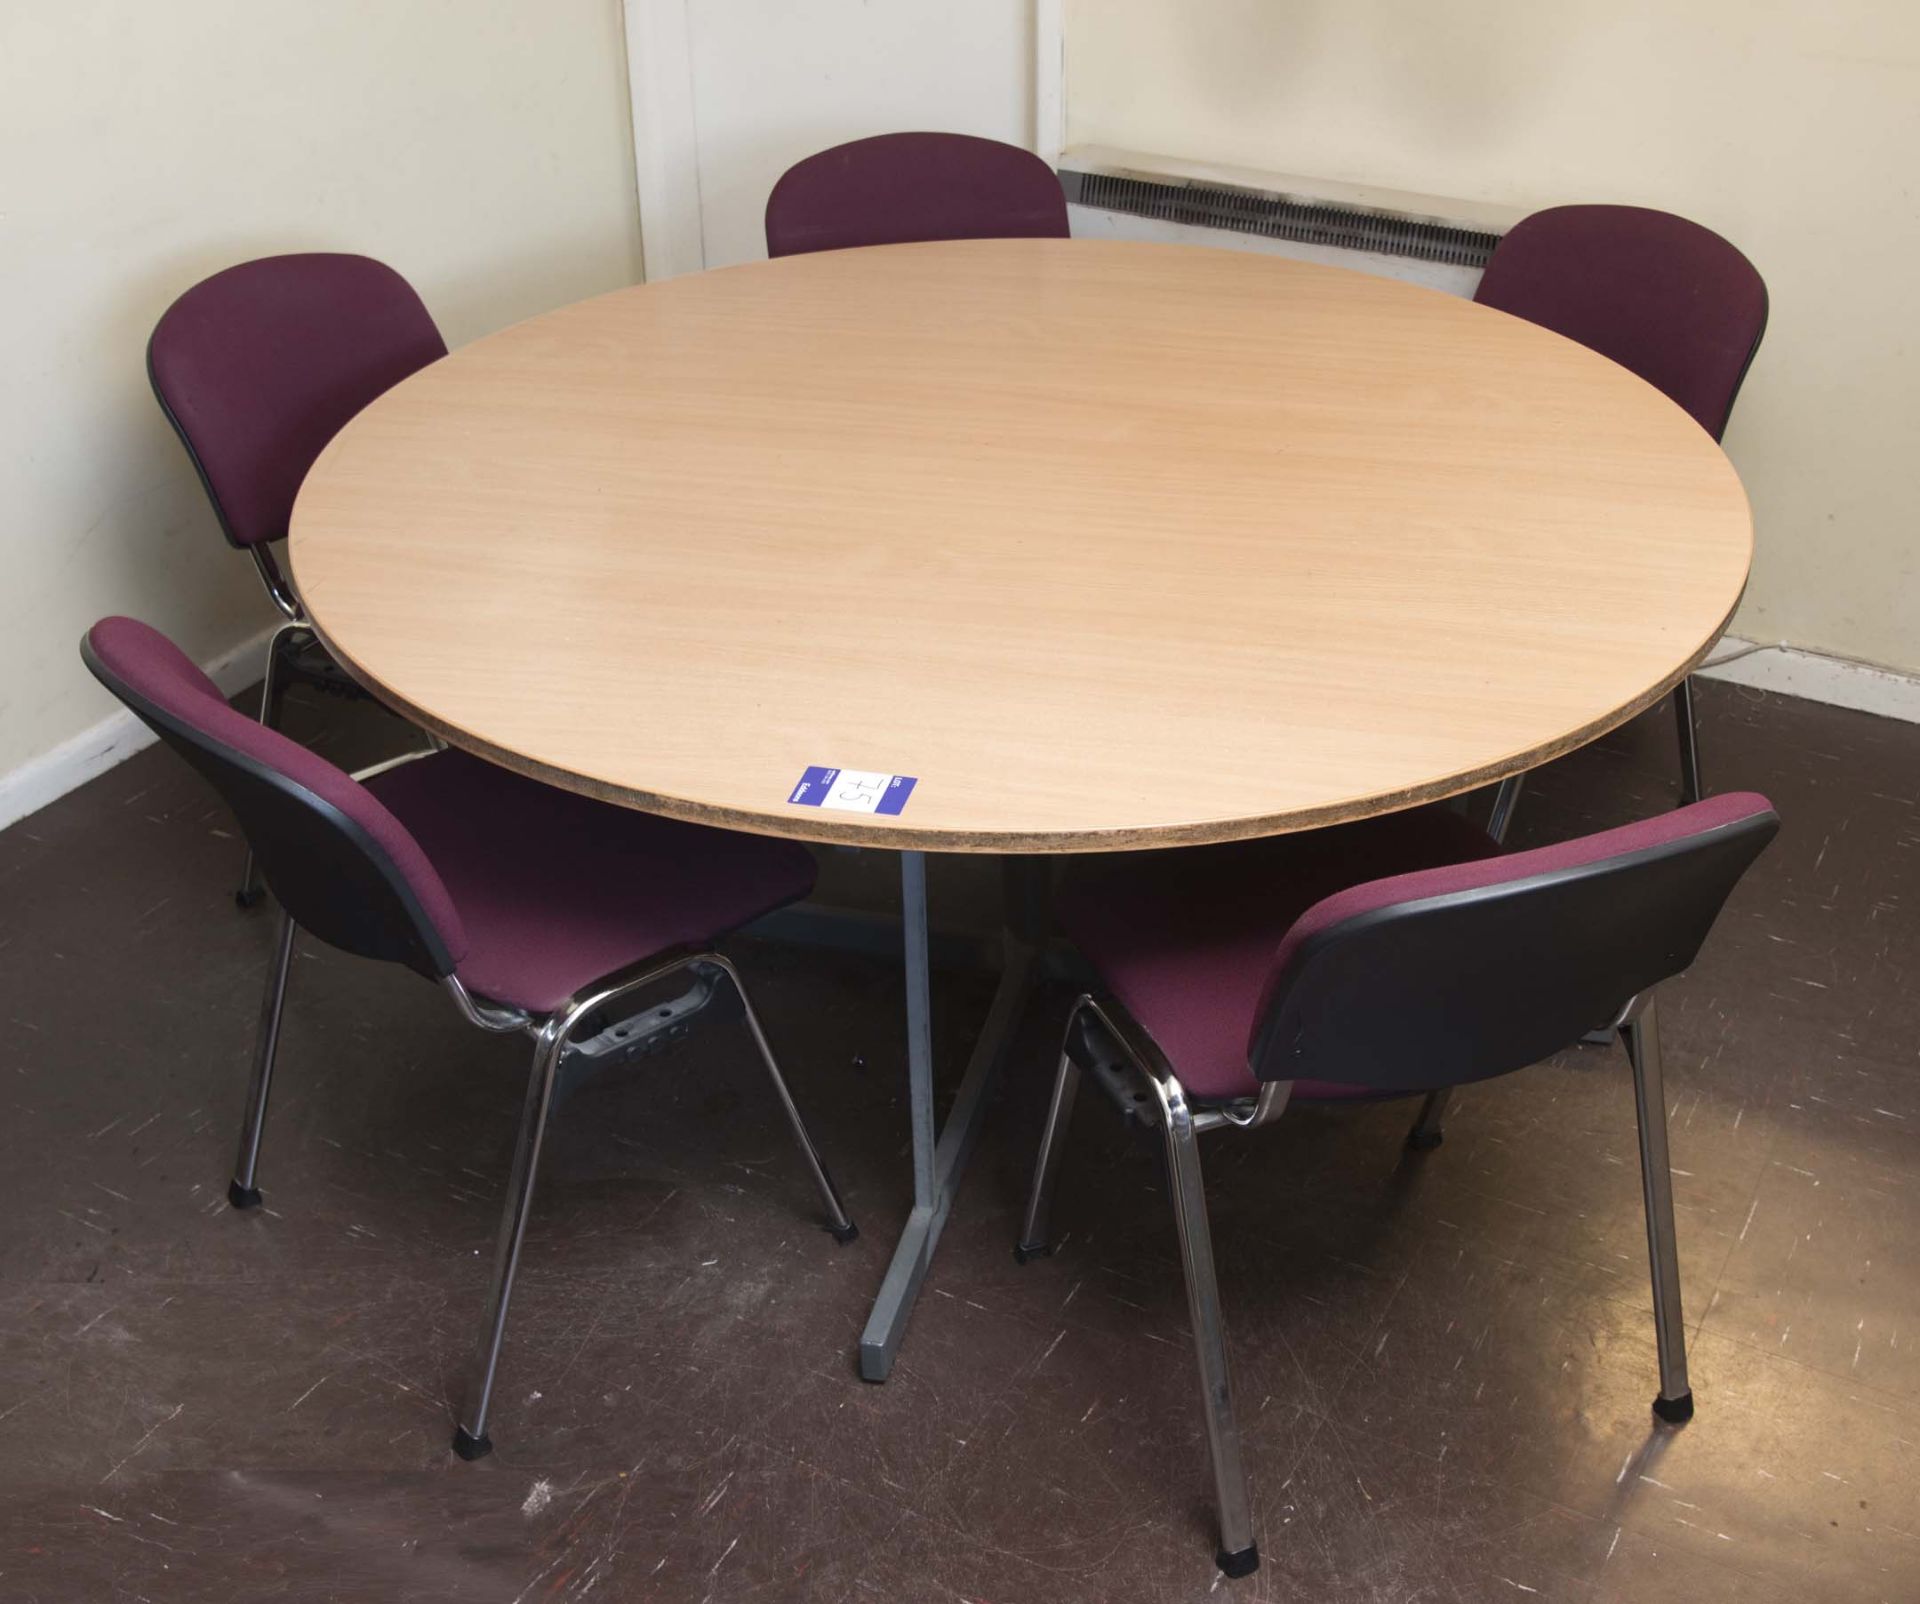 Circular Table 160 cms diameter with 5 burgundy chairs